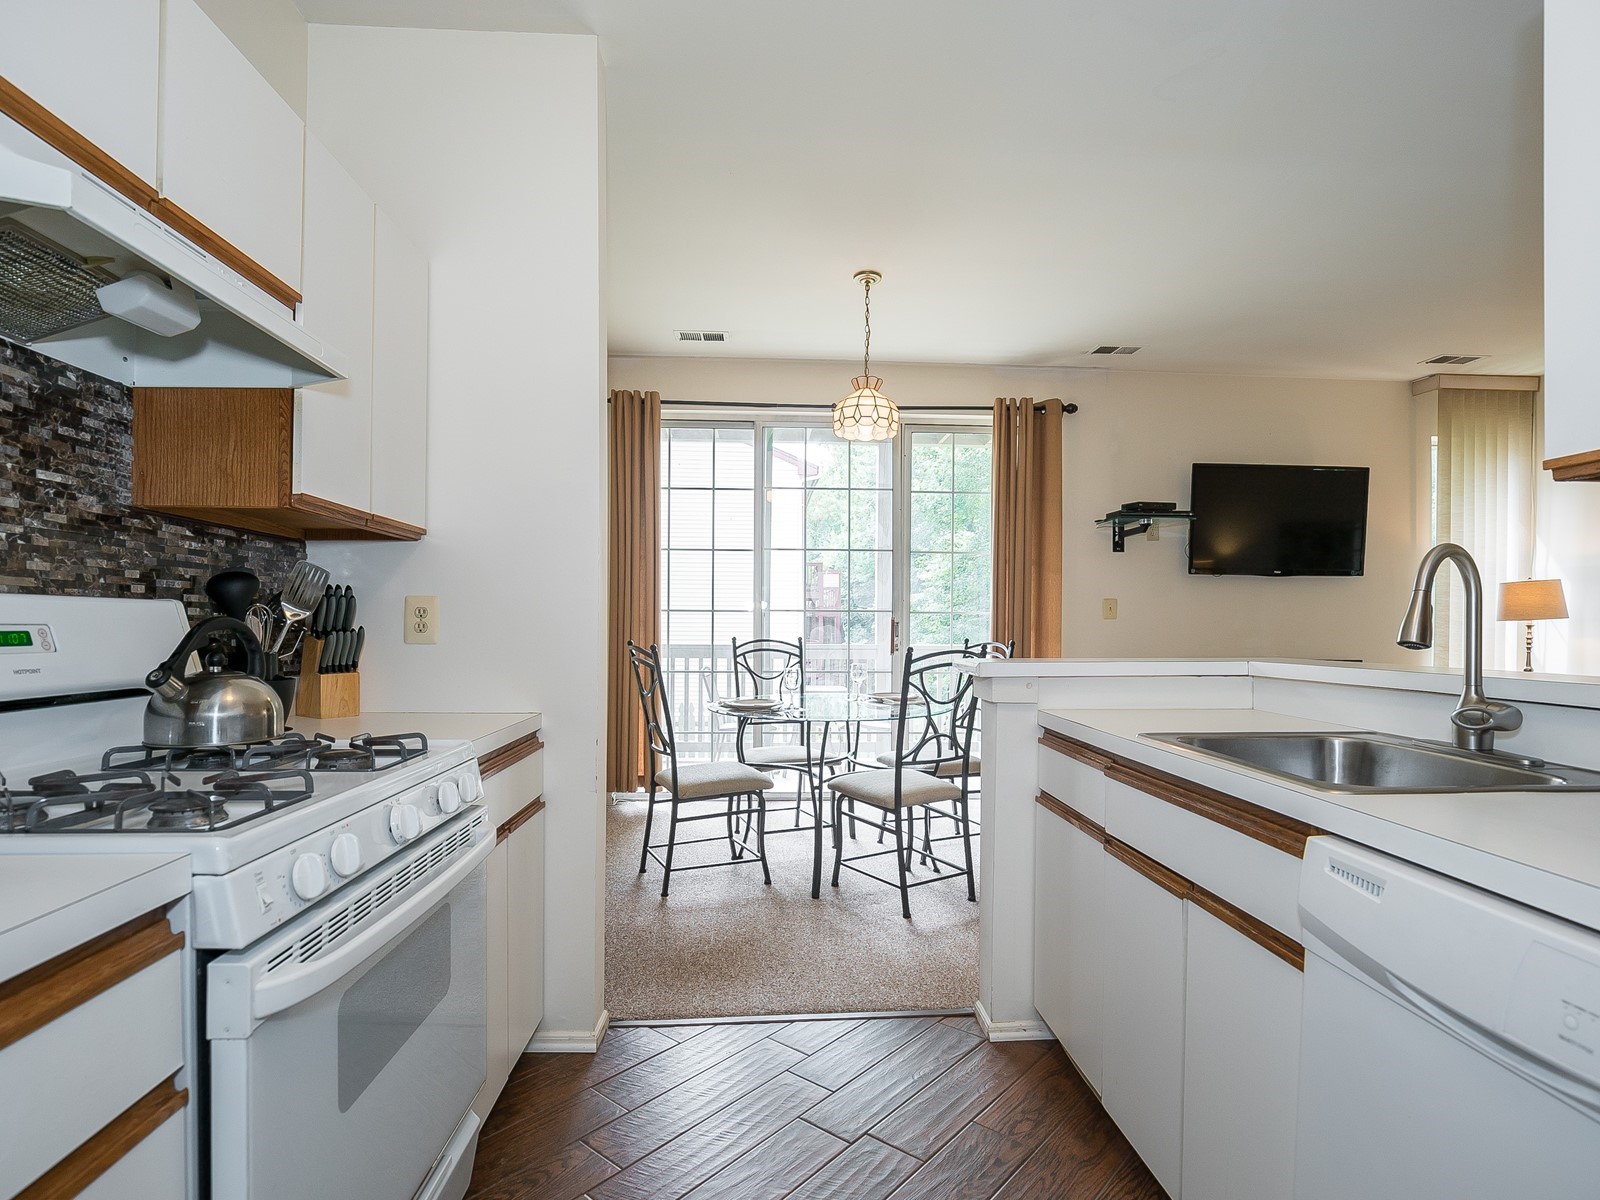 Furnished Apartment South Brunswick 3361 kitchen with all included appliances and view into dining area